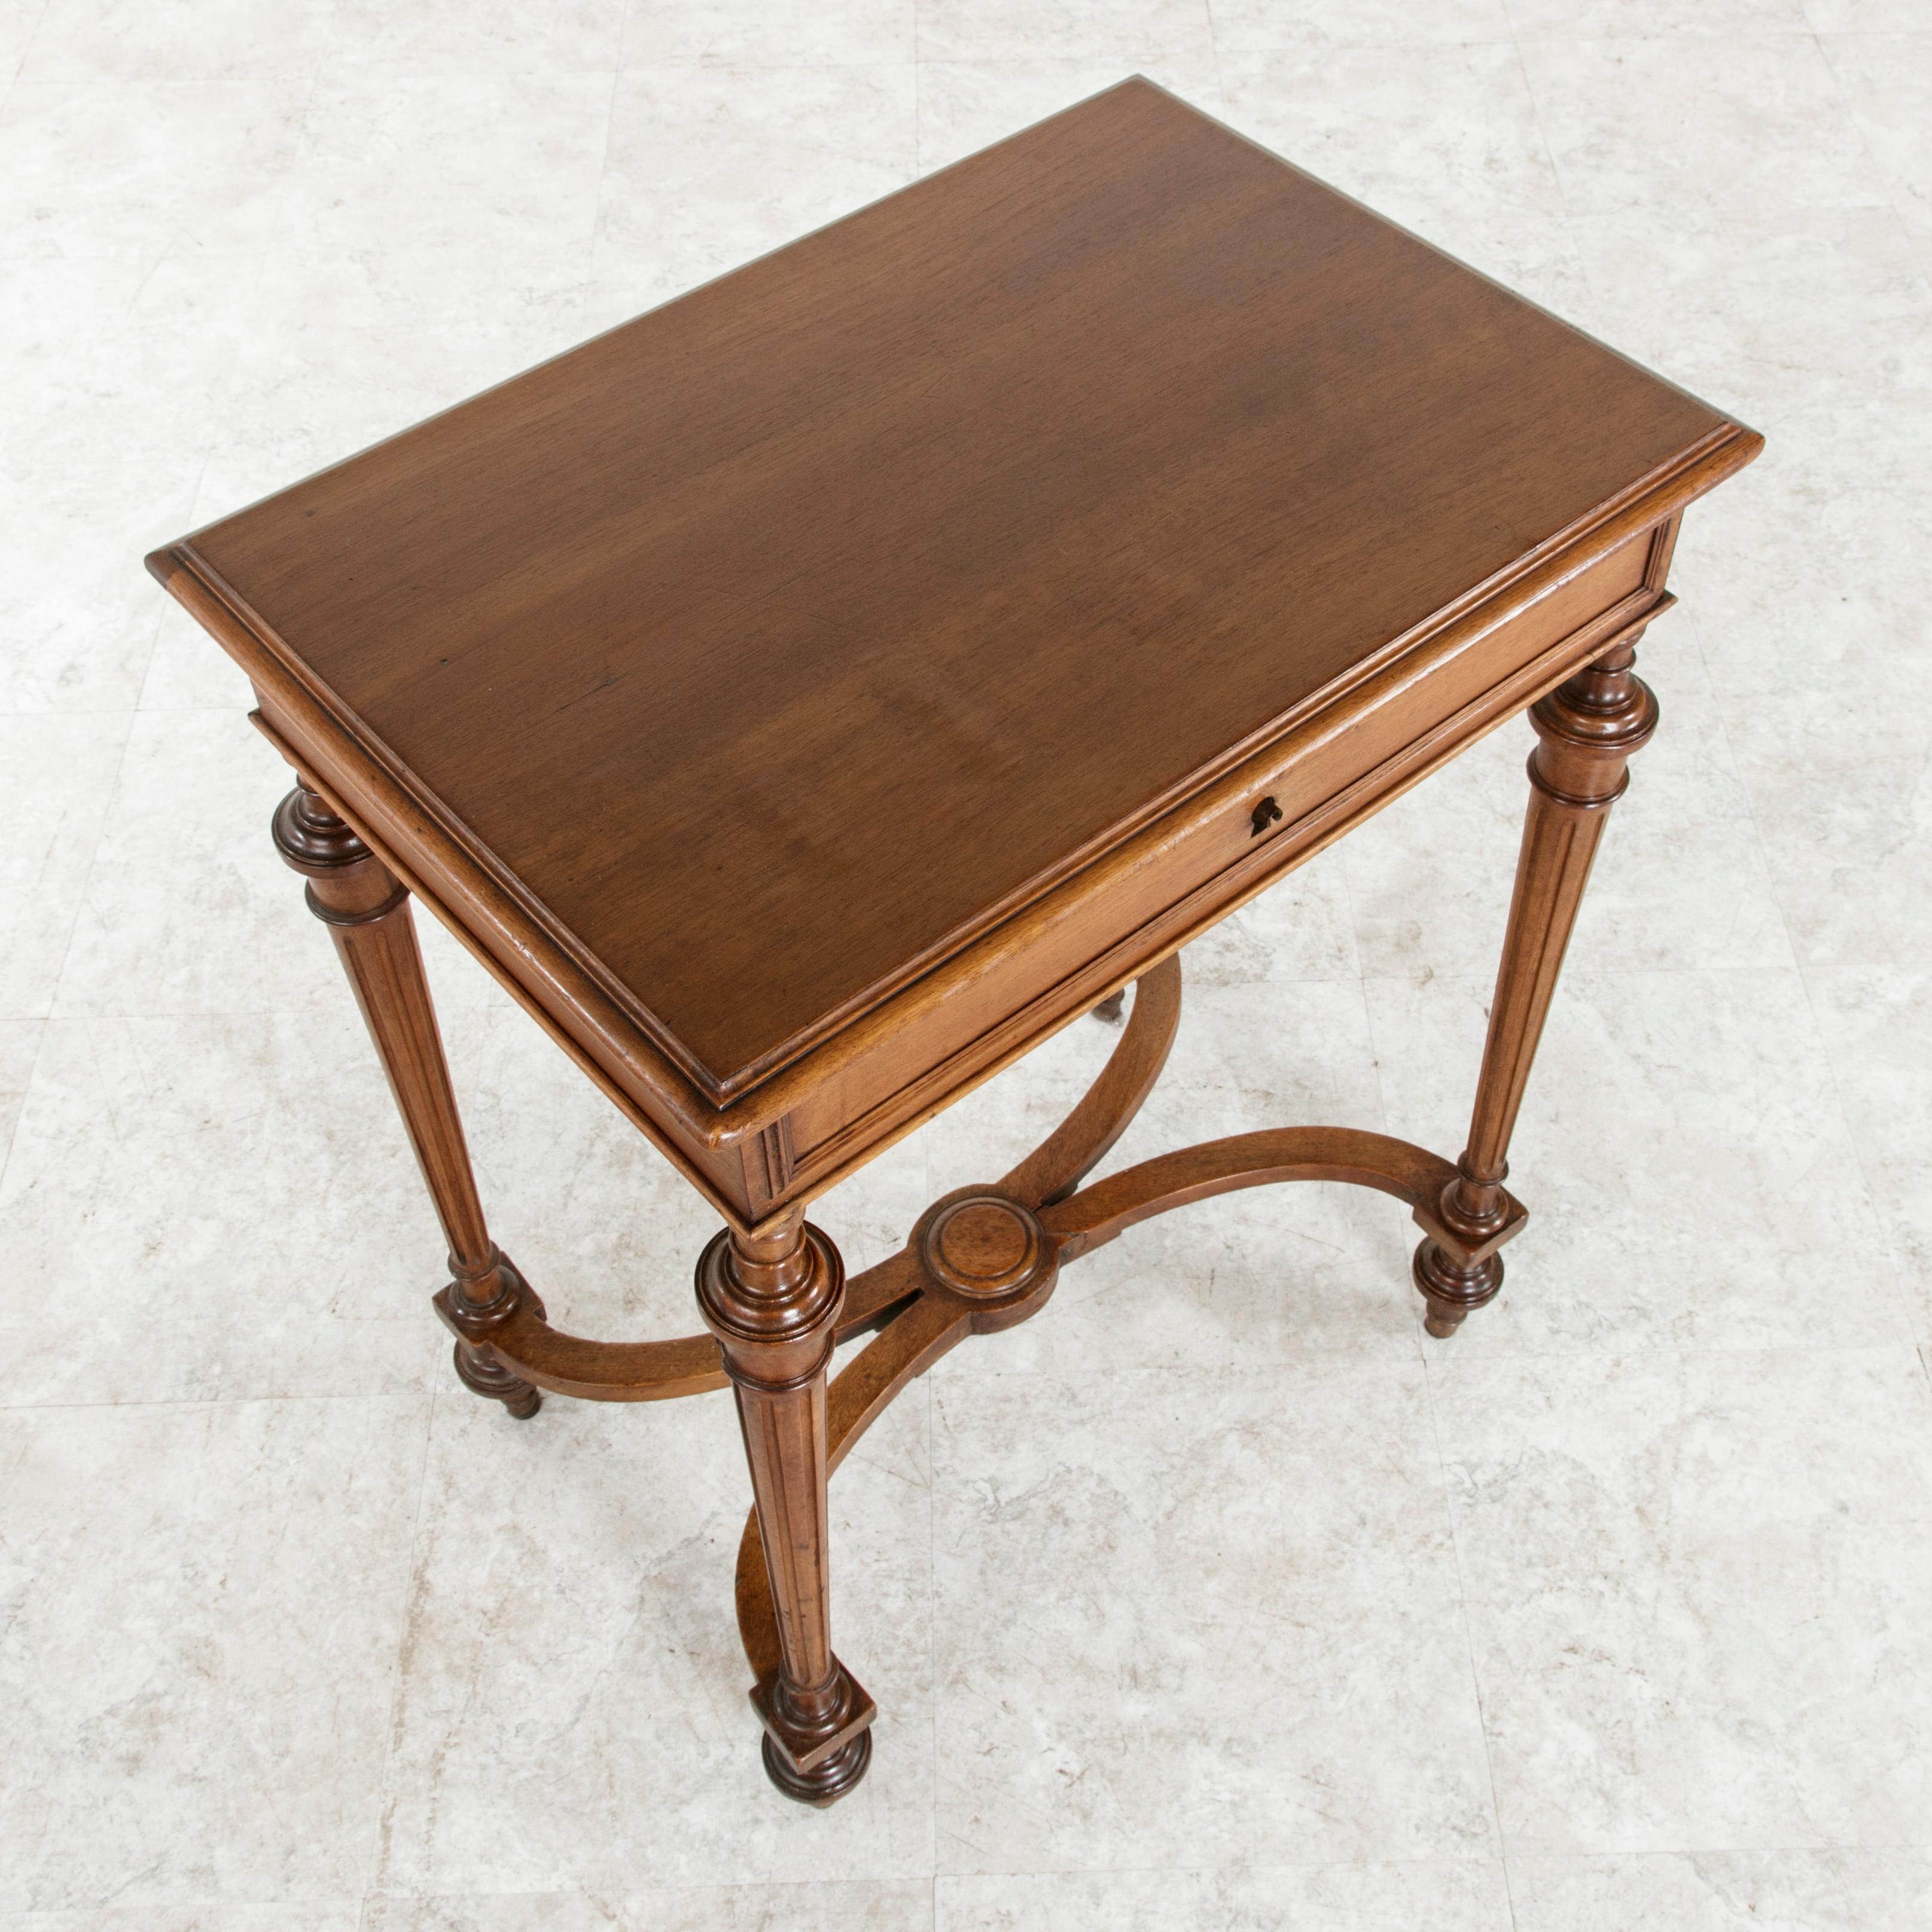 Late 19th Century French Louis XVI Style Walnut Side Table or Occasional Table 4